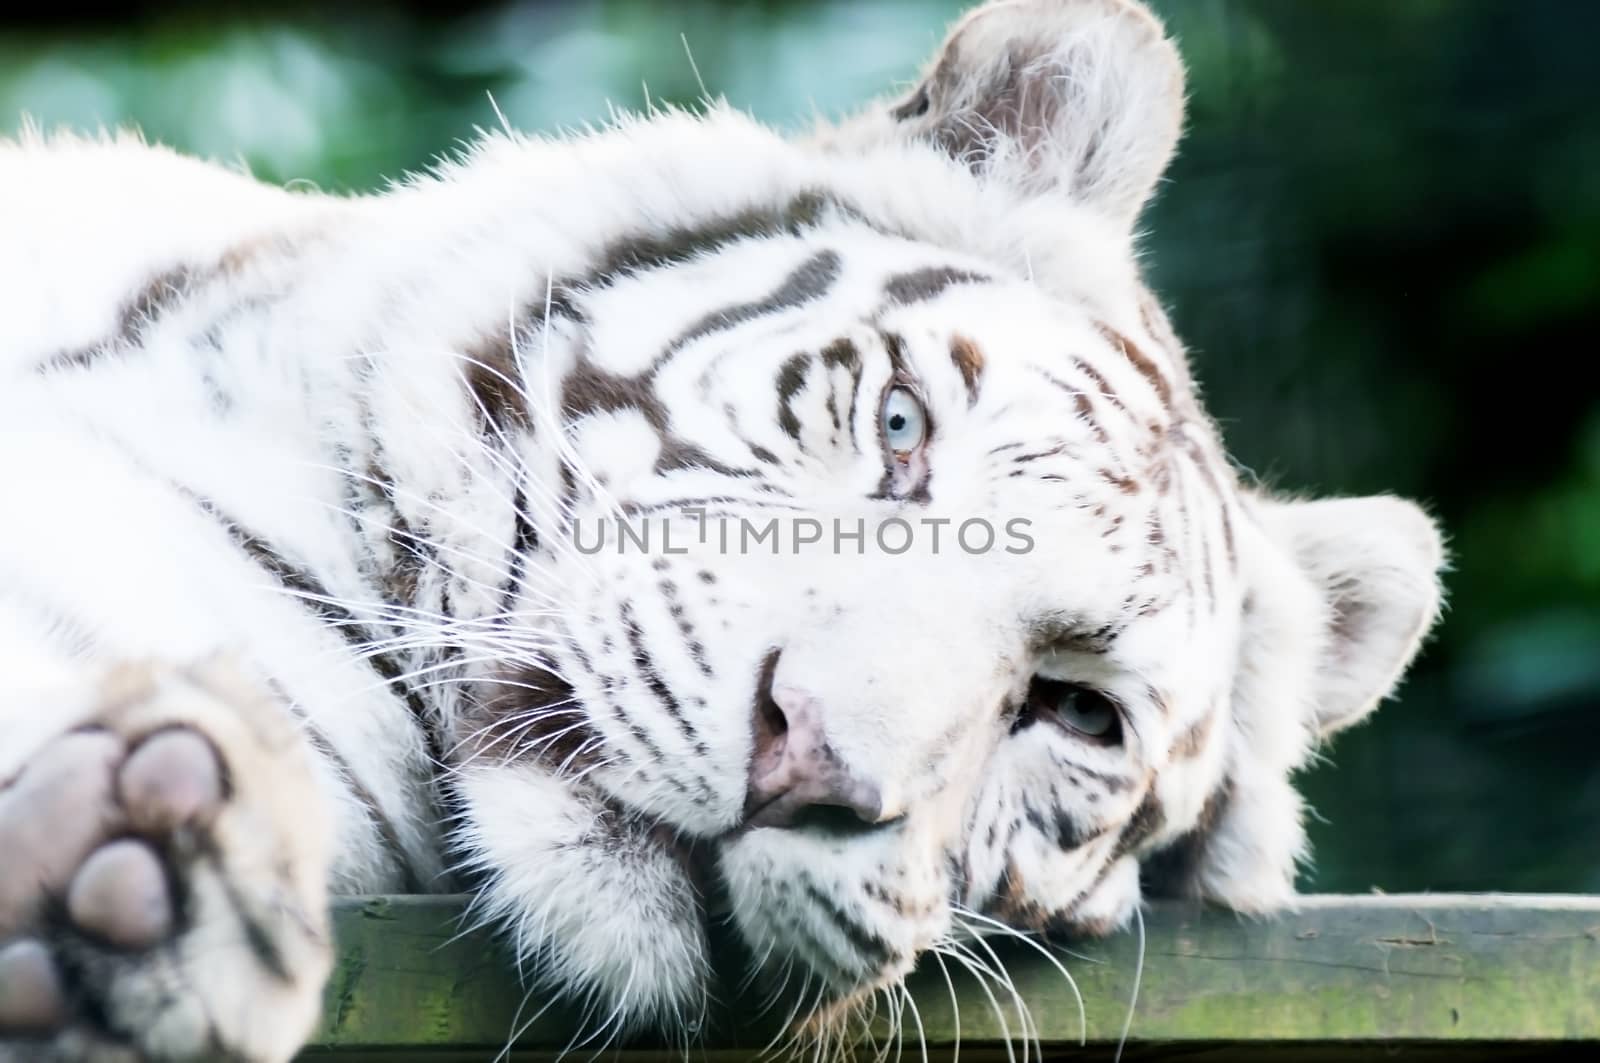 Closeup of white tiger resting showing fur detail and whiskers